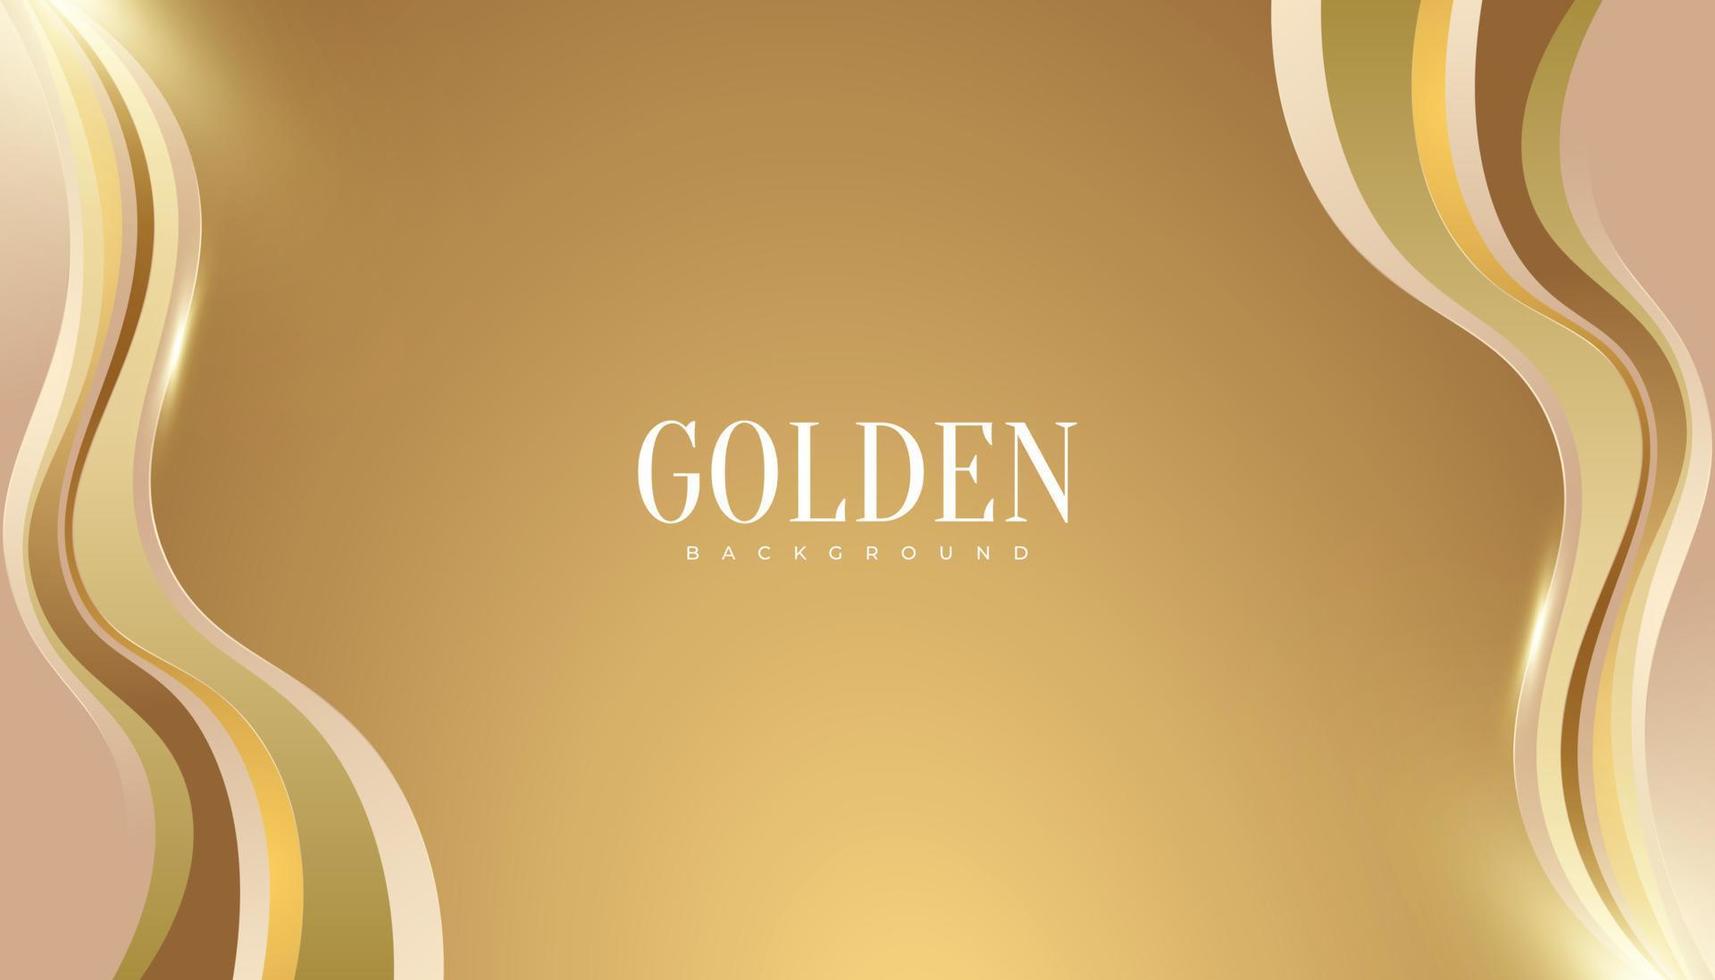 Luxury Golden Background with Glitter and Light Effect. Elegant Premium Background with Wavy Lines and Paper Cut Style vector